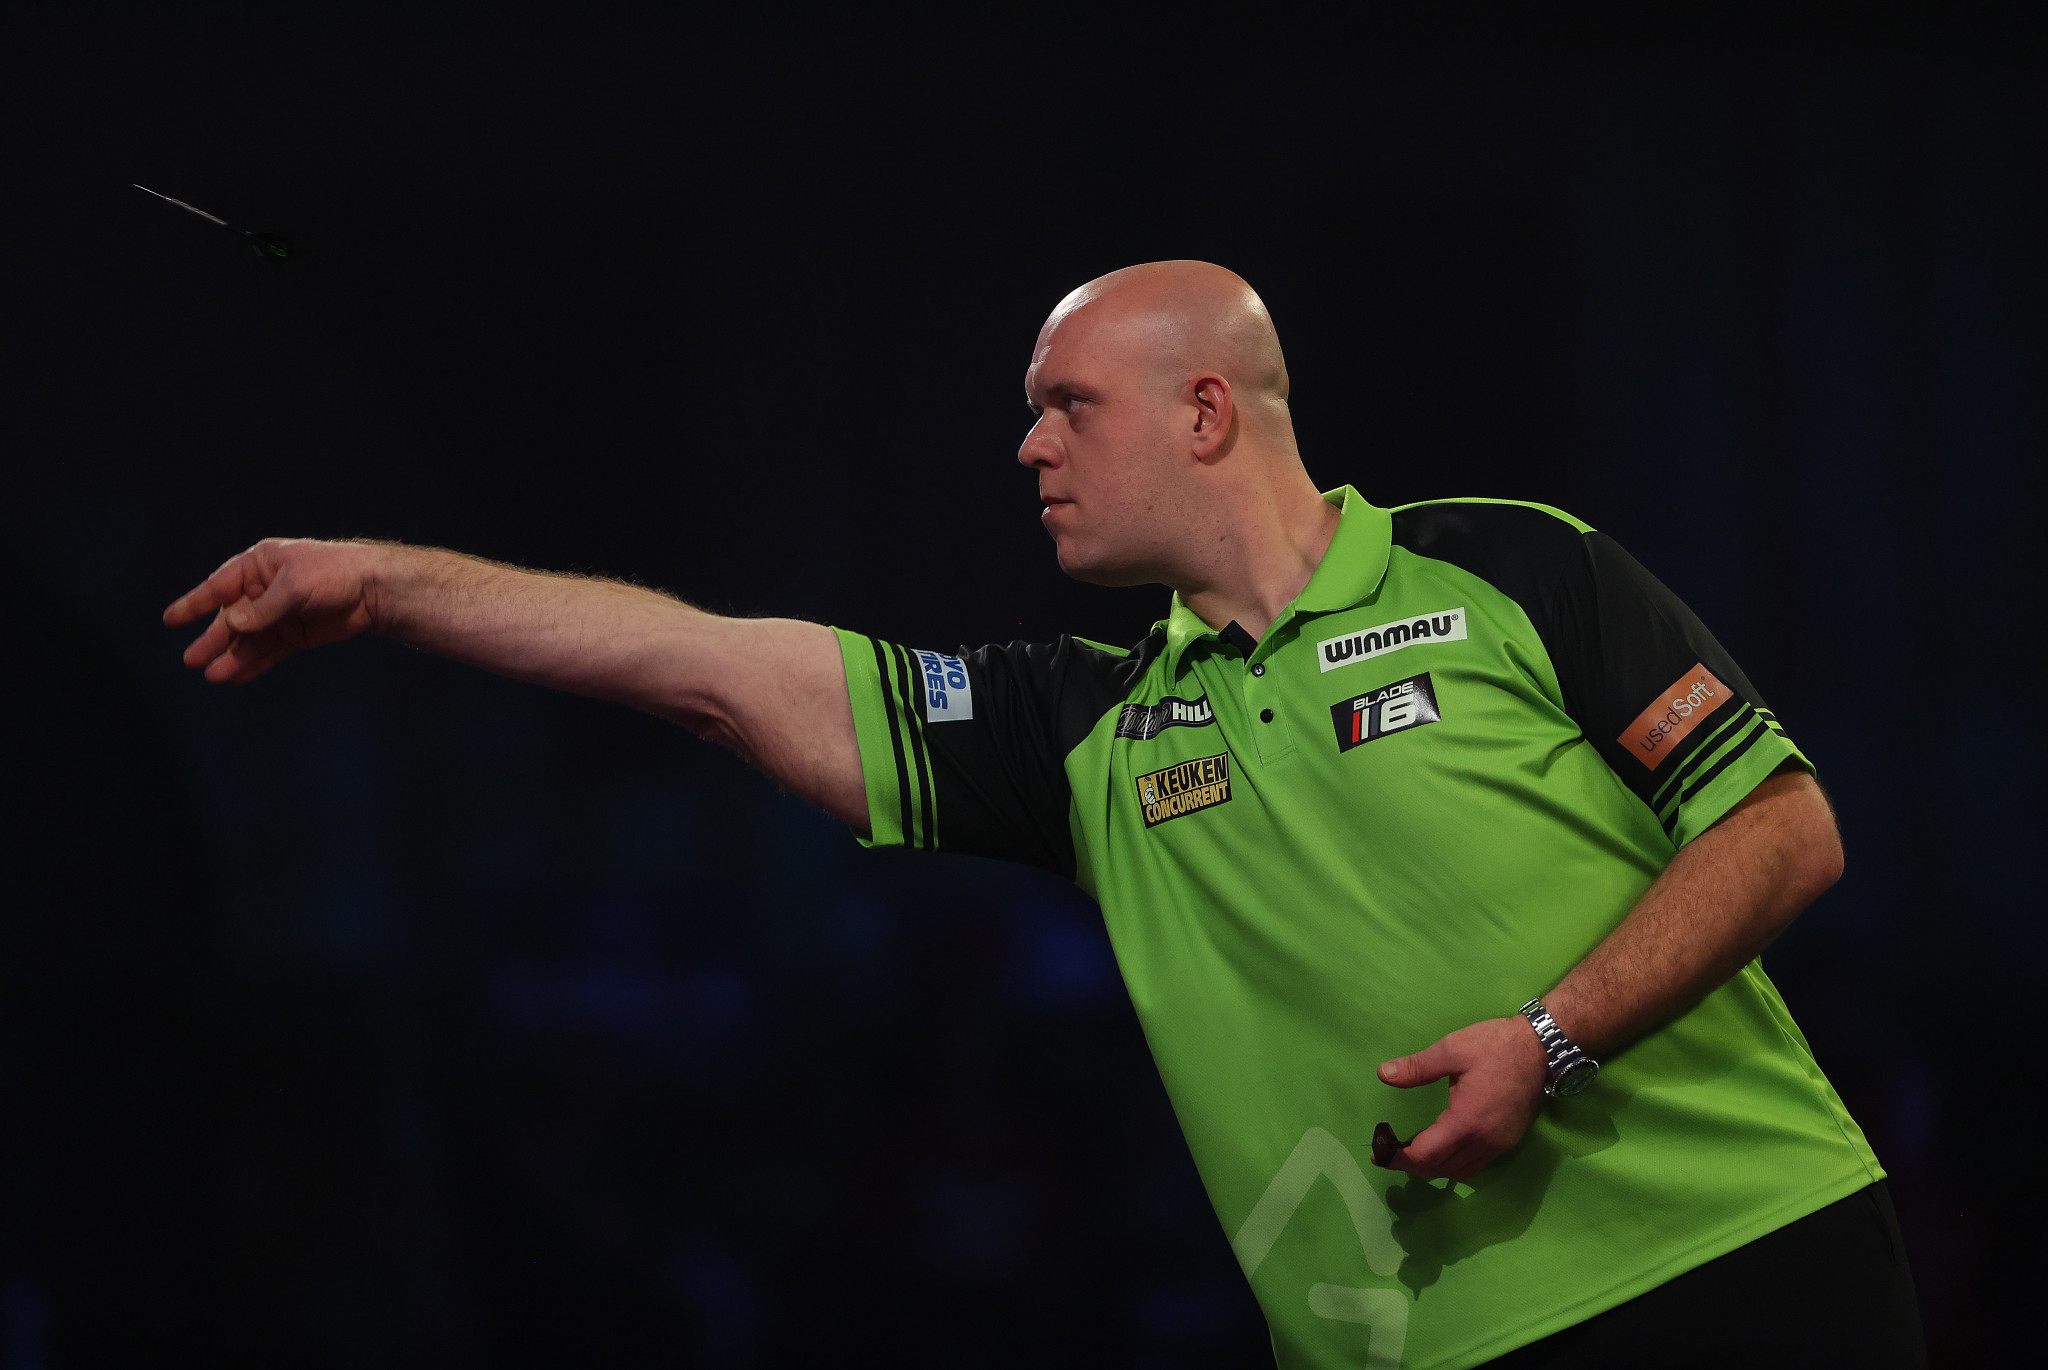 Van Gerwen withdraws from PDC World Darts Championship due to COVID-19